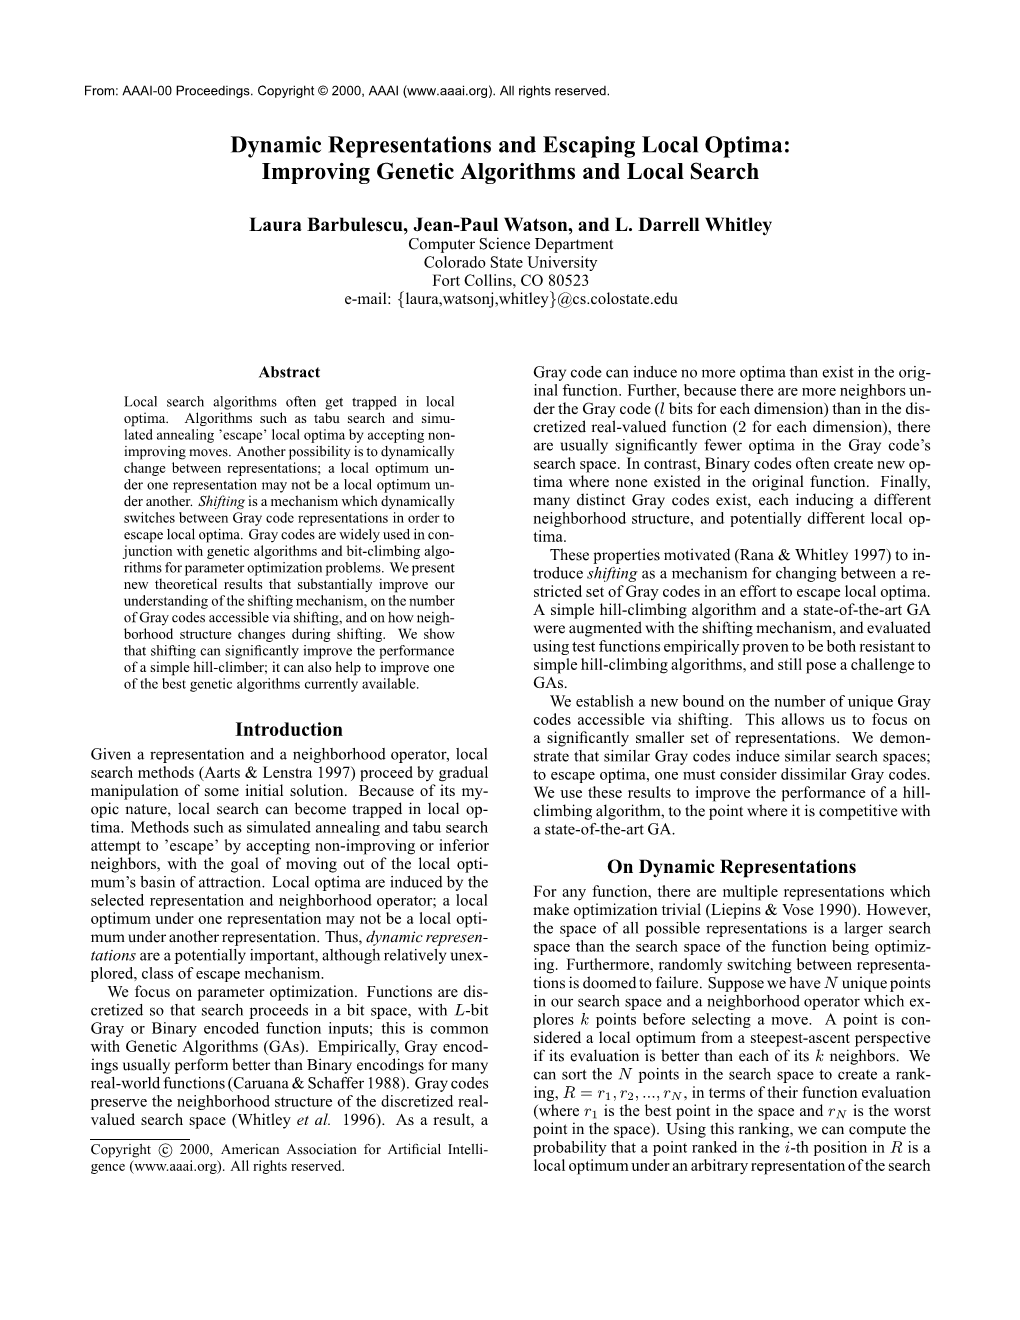 Dynamic Representations and Escaping Local Optima: Improving Genetic Algorithms and Local Search